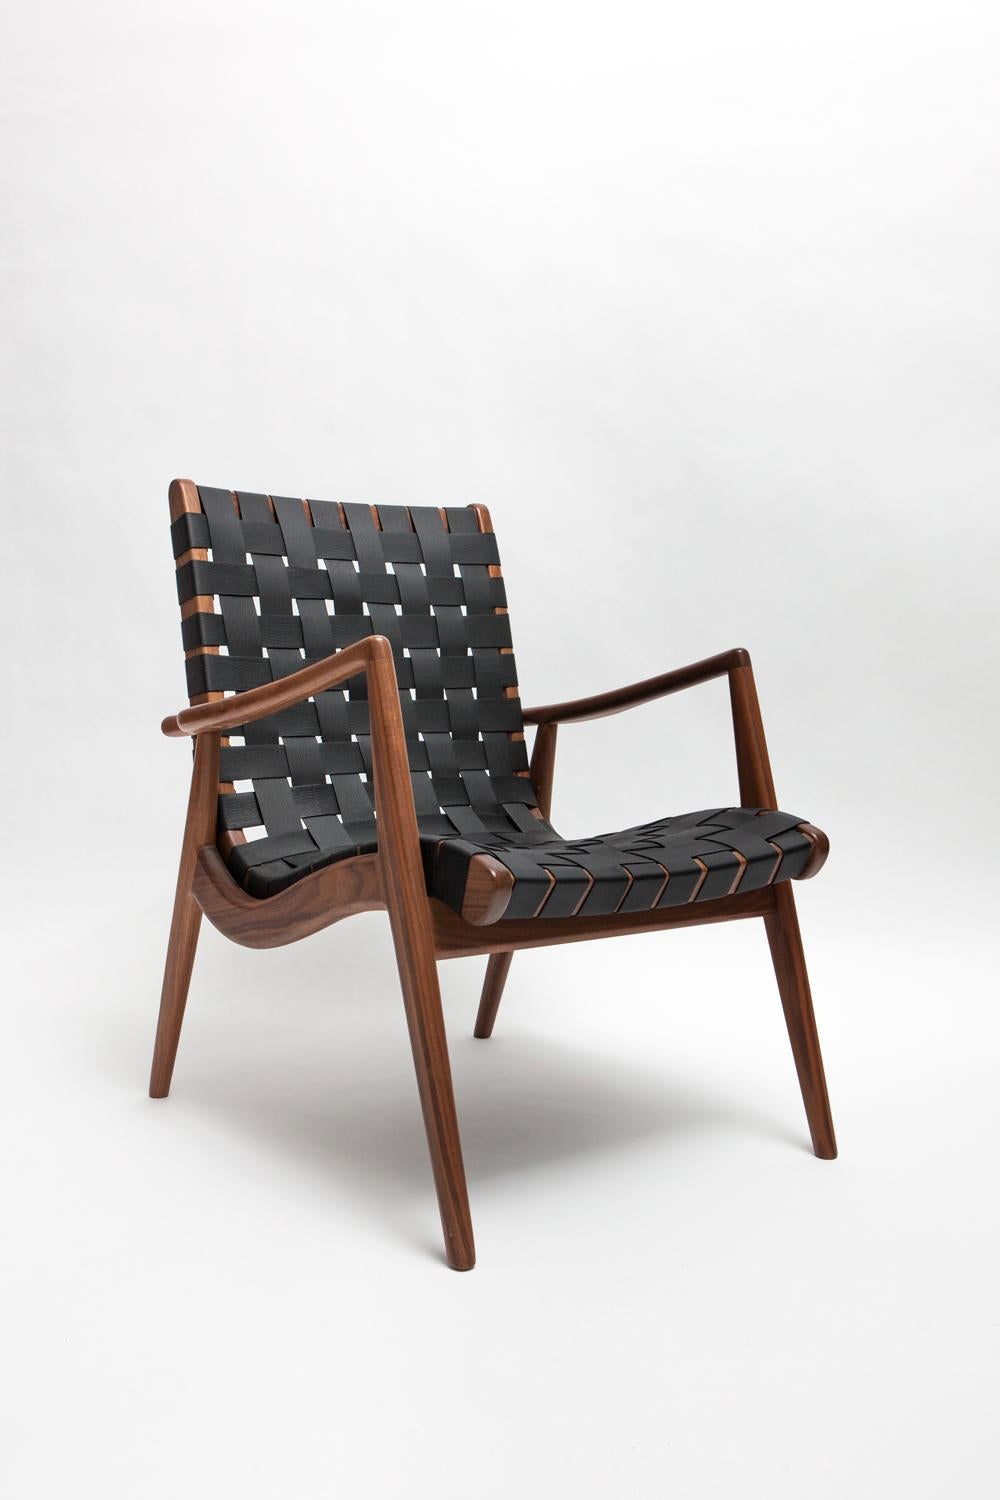 Originally designed by Mel Smilow in 1956 and officially reintroduced by his daughter Judy Smilow in 2013, the woven leather lounge chair is classically midcentury. The simplistic beauty, fine craftsmanship, and exceptional detail is present from